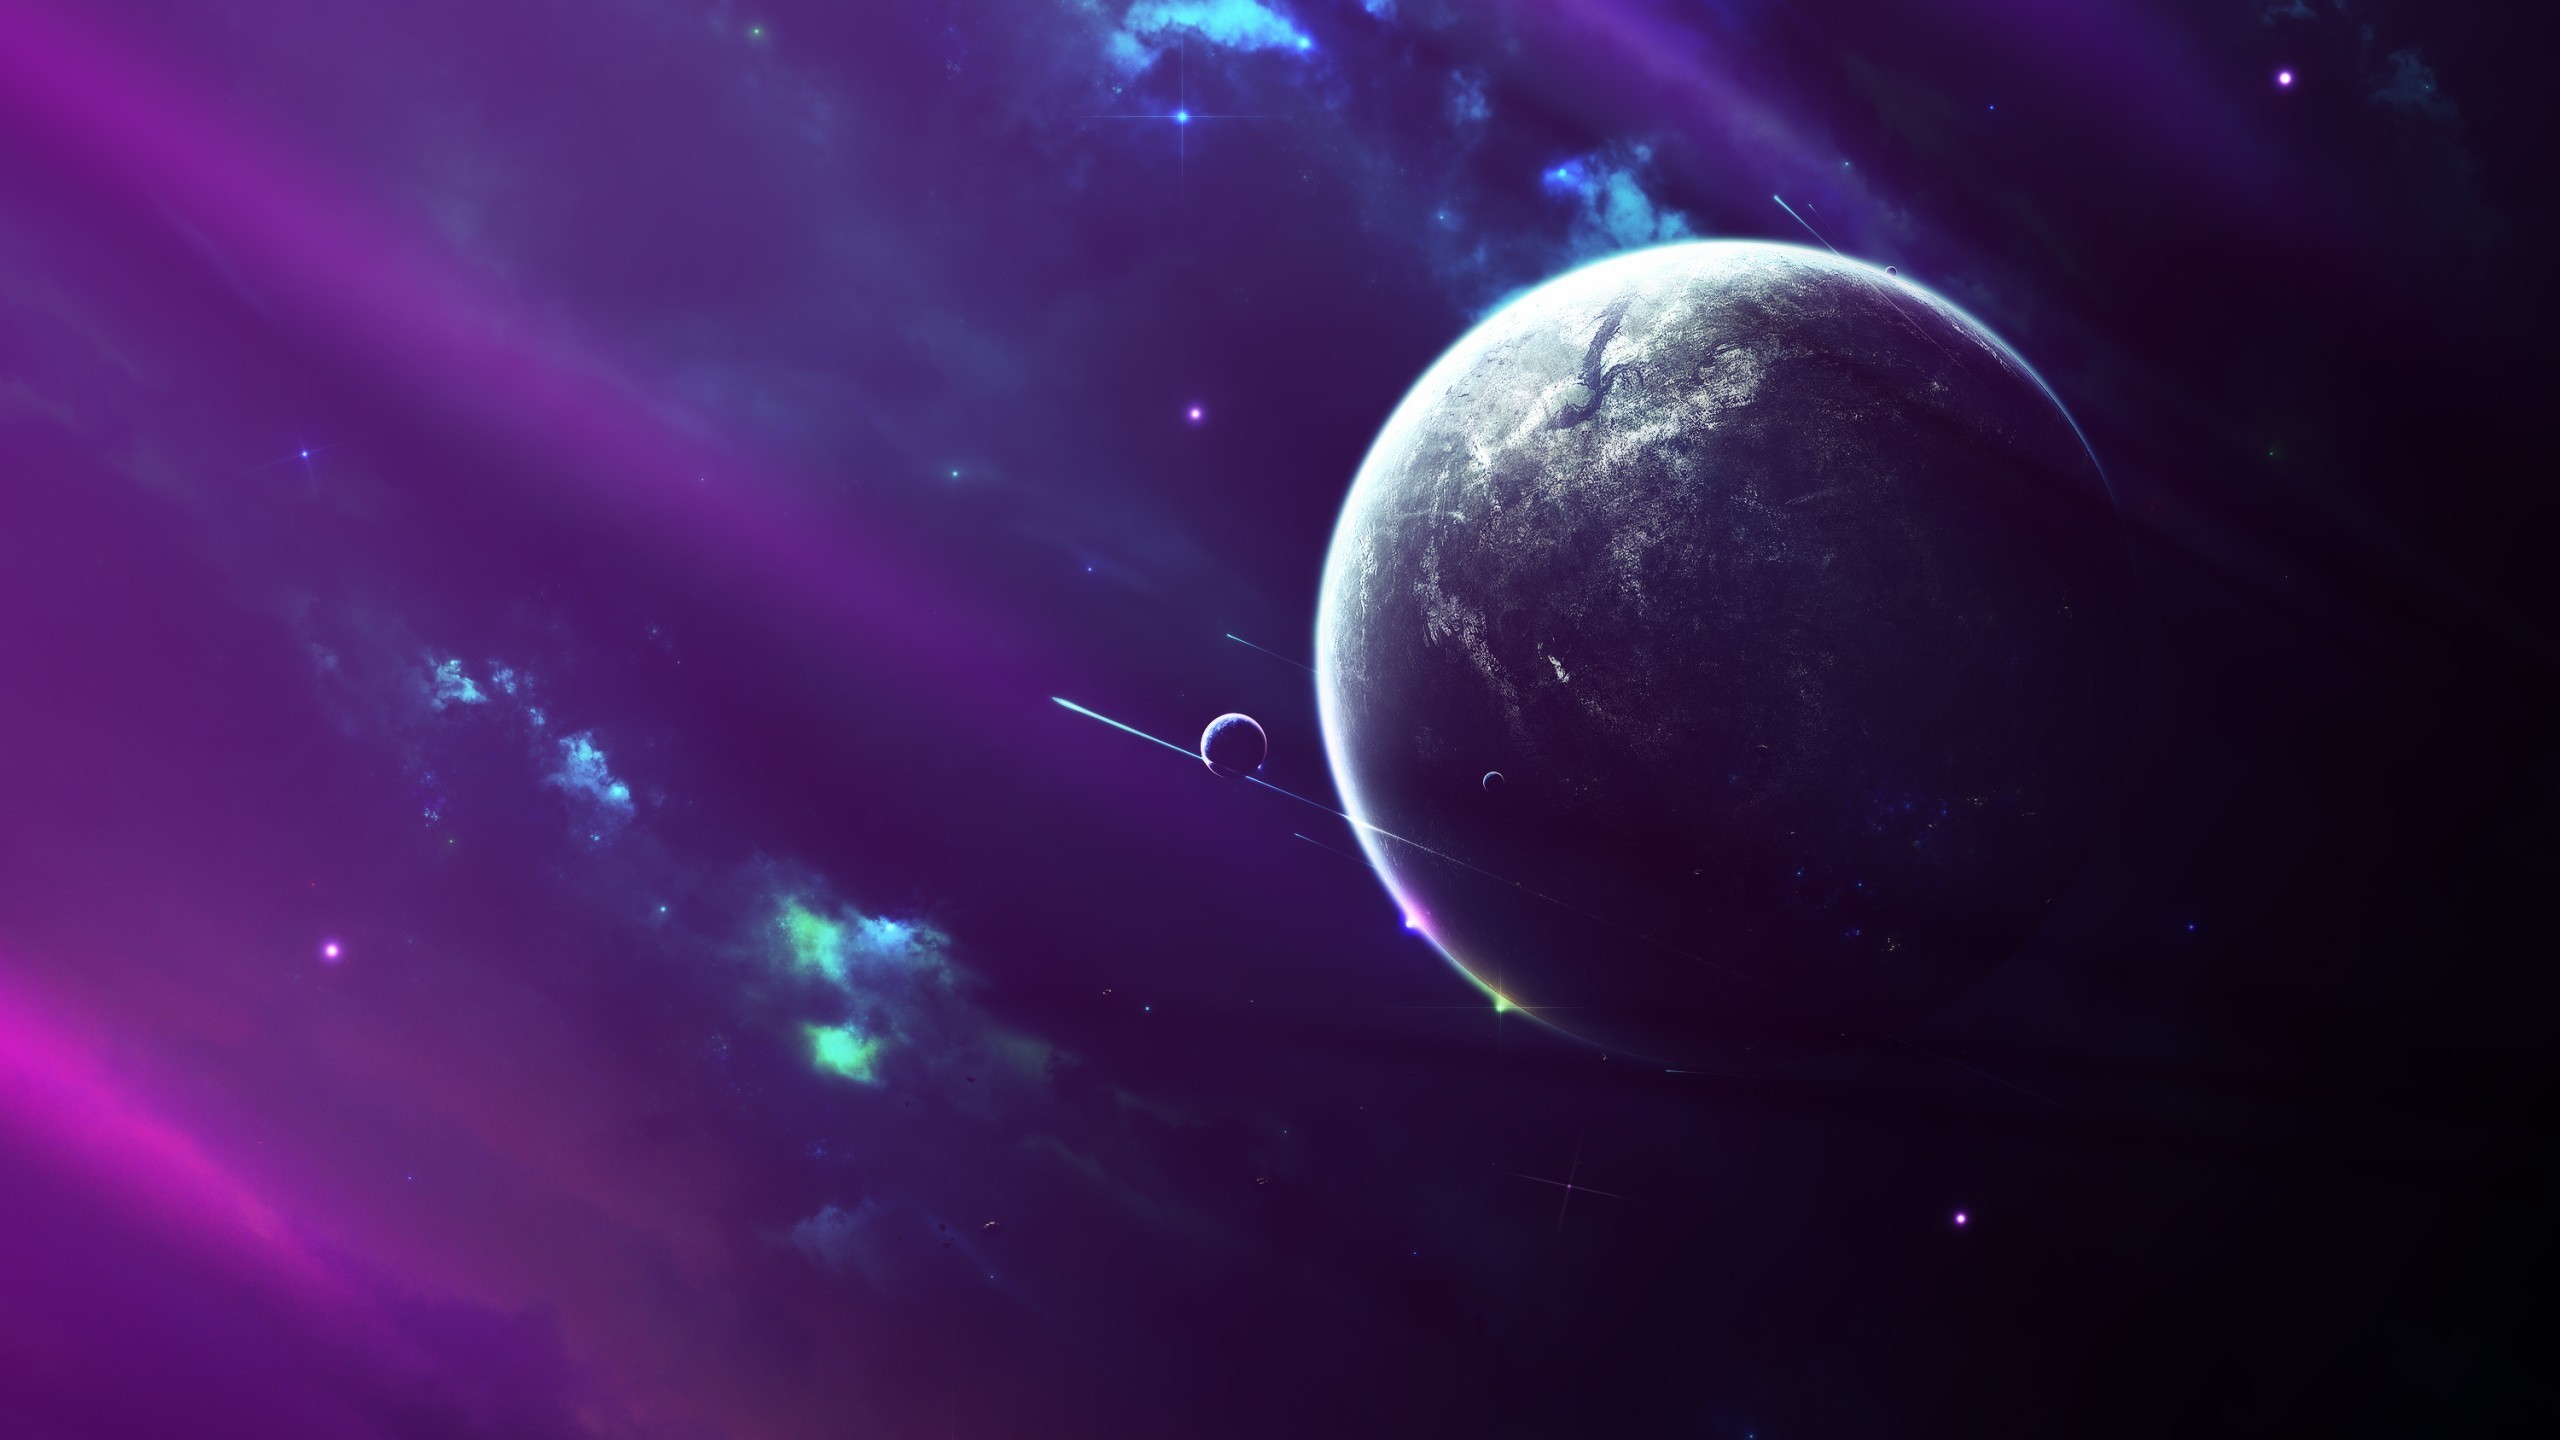 Planet, Space, Fantasy art Wallpapers HD / Desktop and Mobile Backgrounds